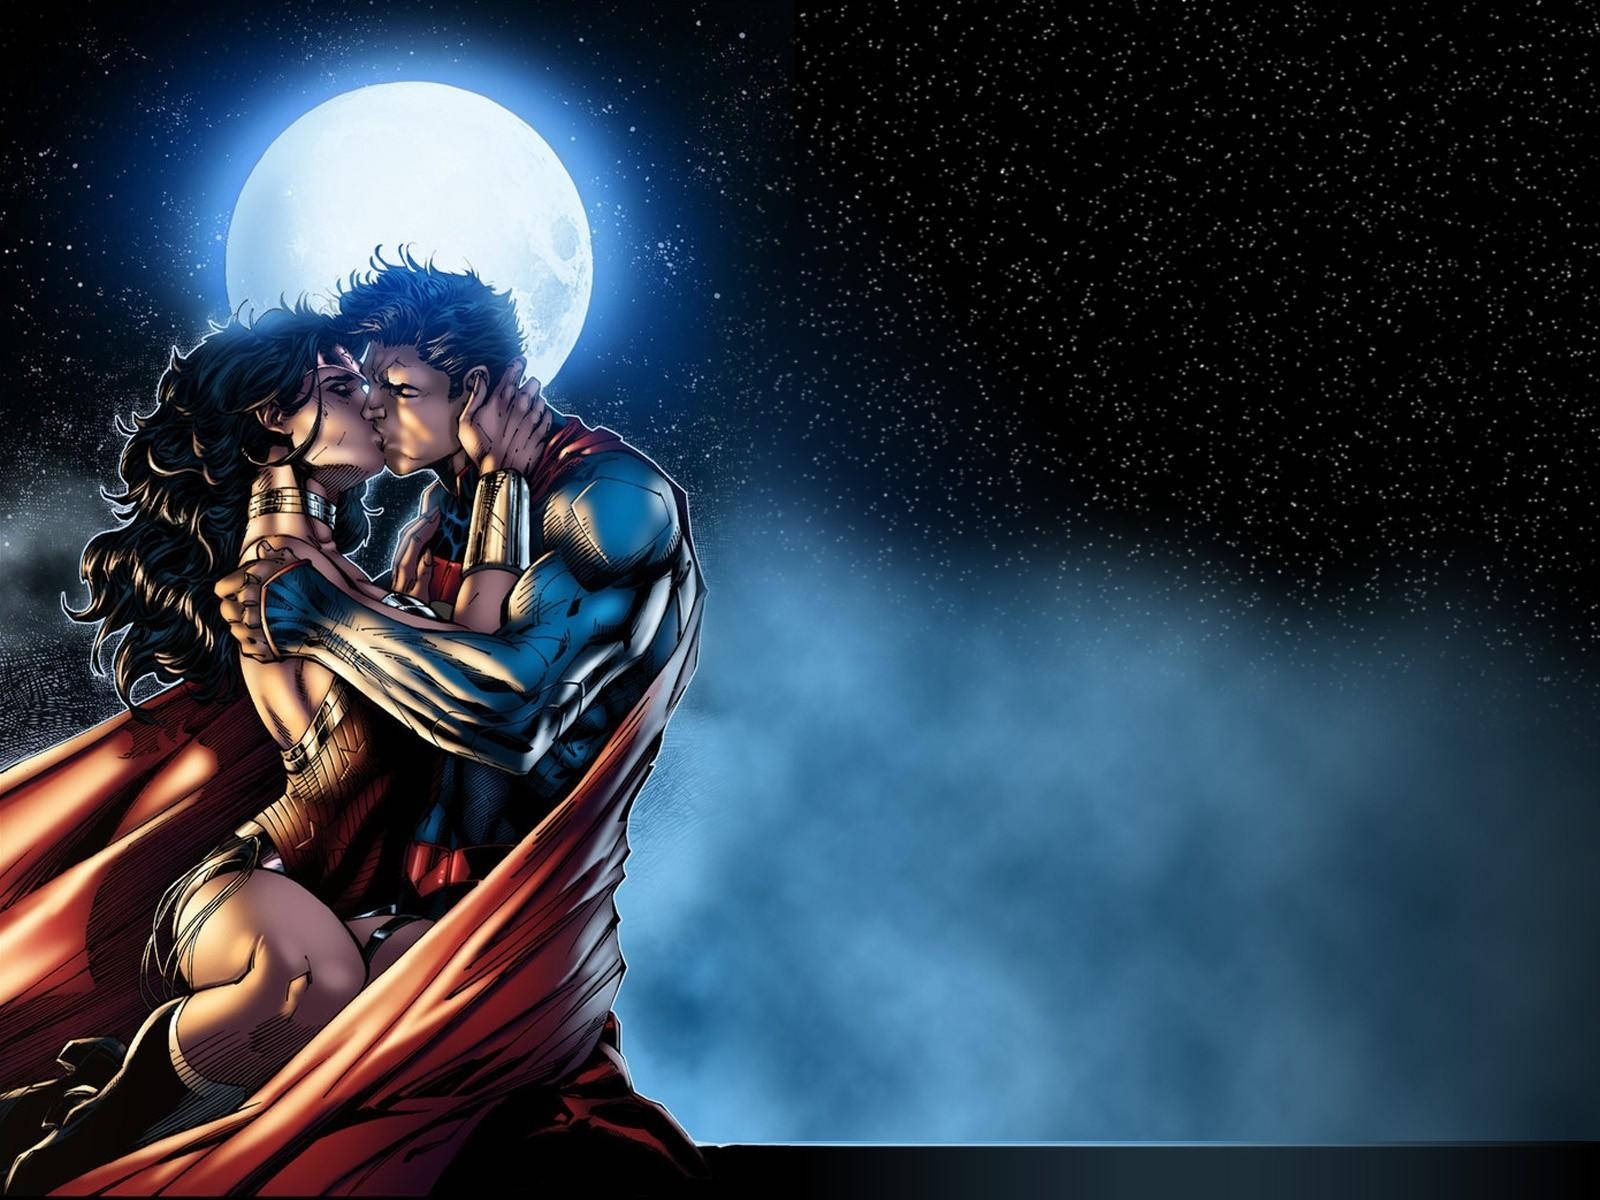 Superman And Wonder Woman Kissing In Front Of The Moon